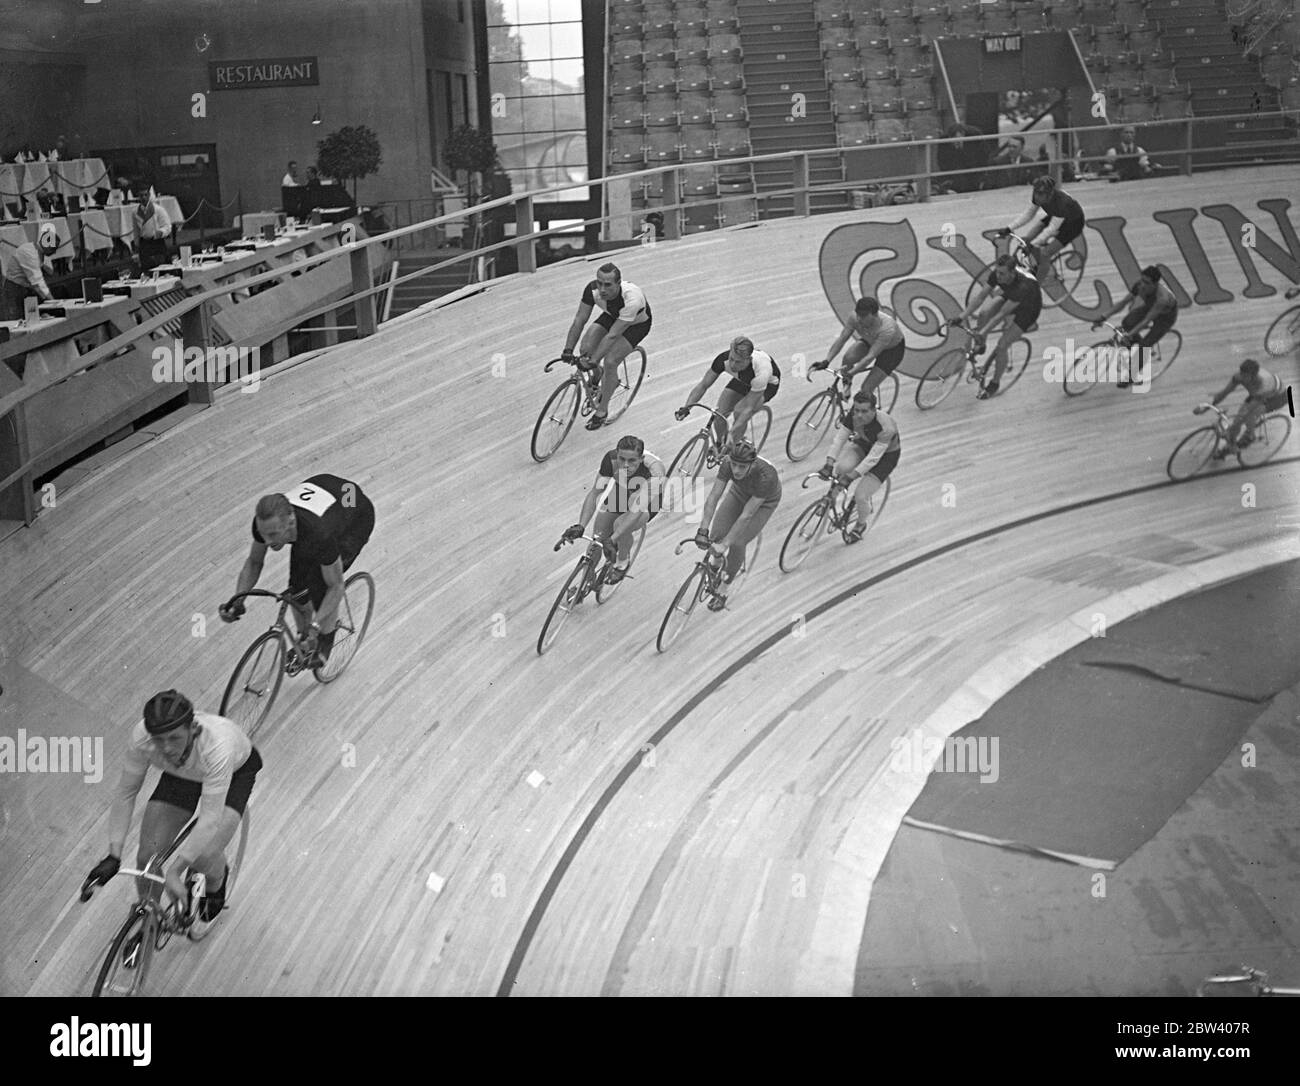 Sprinting at the six days cycle race . Sprints enlivened the first day of the International six days cycle race in which 15 teams representing several countries are competing at Wembley Pool . Photo shows , the sprint in progress at Wembley . 21 September 1936 Stock Photo